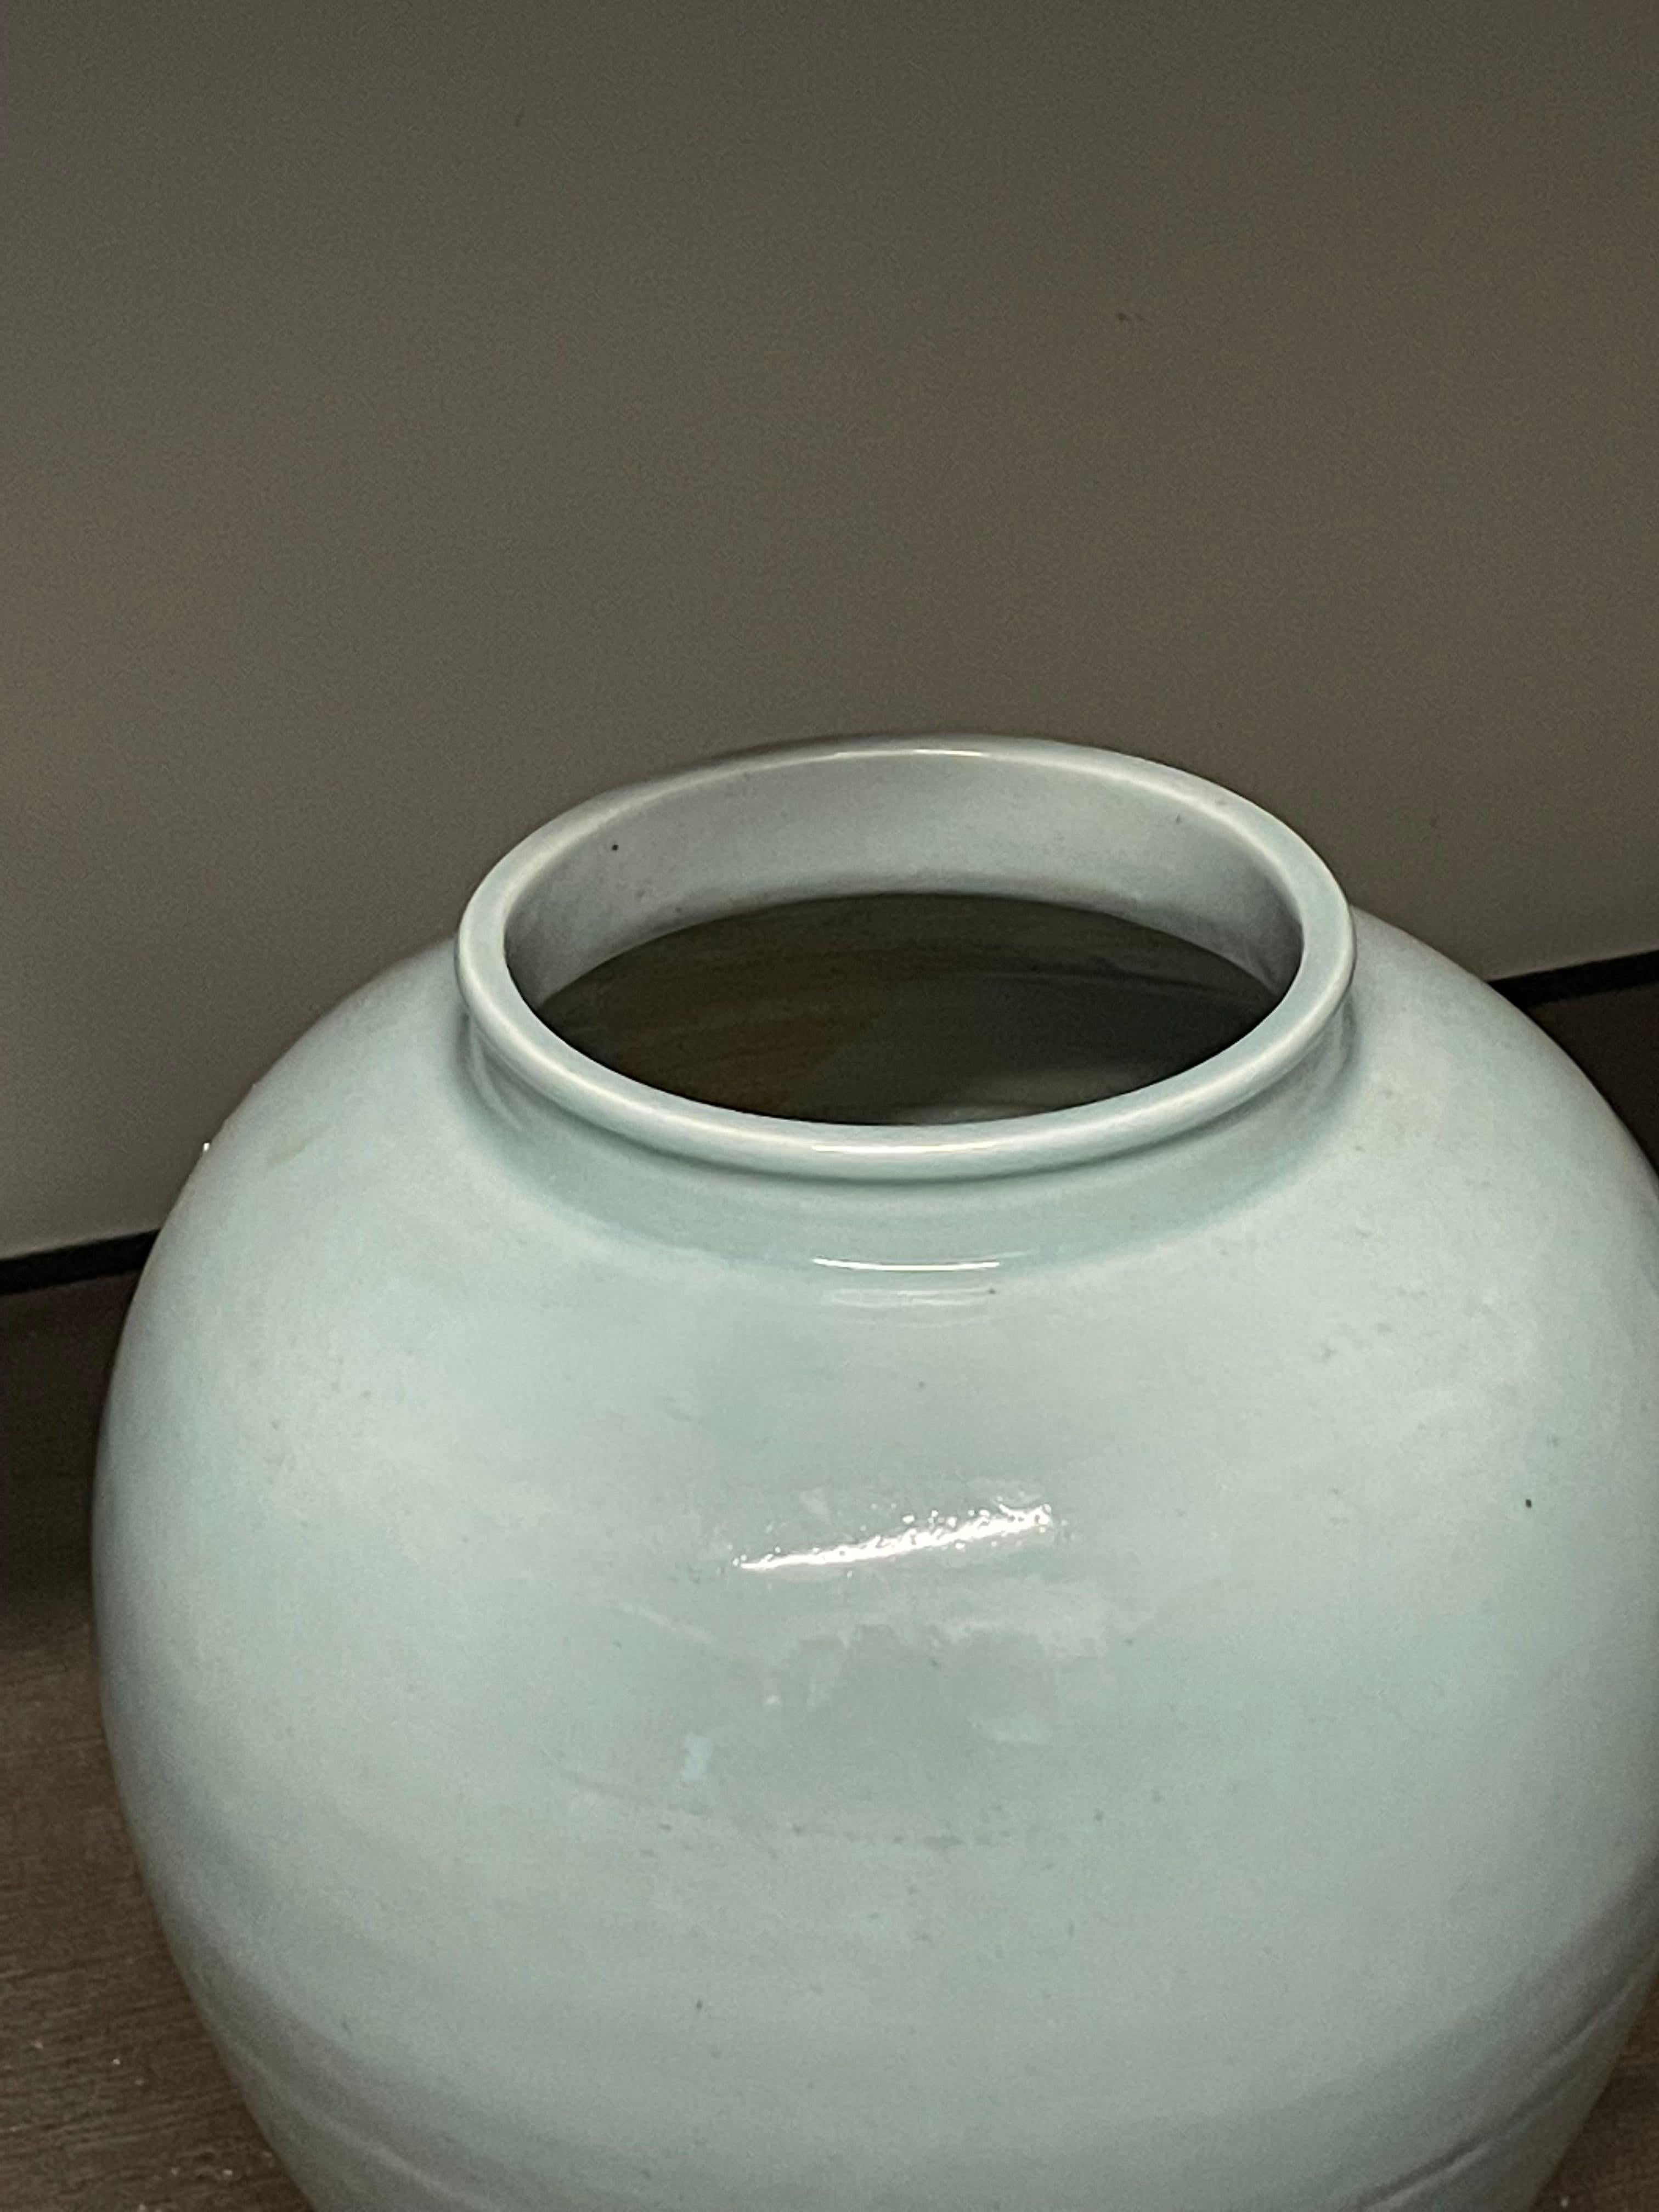 Contemporary Chinese celedon glazed vase.
The glaze gives the vase the appearance of a weathered look.
Wide mouth curved shape.
